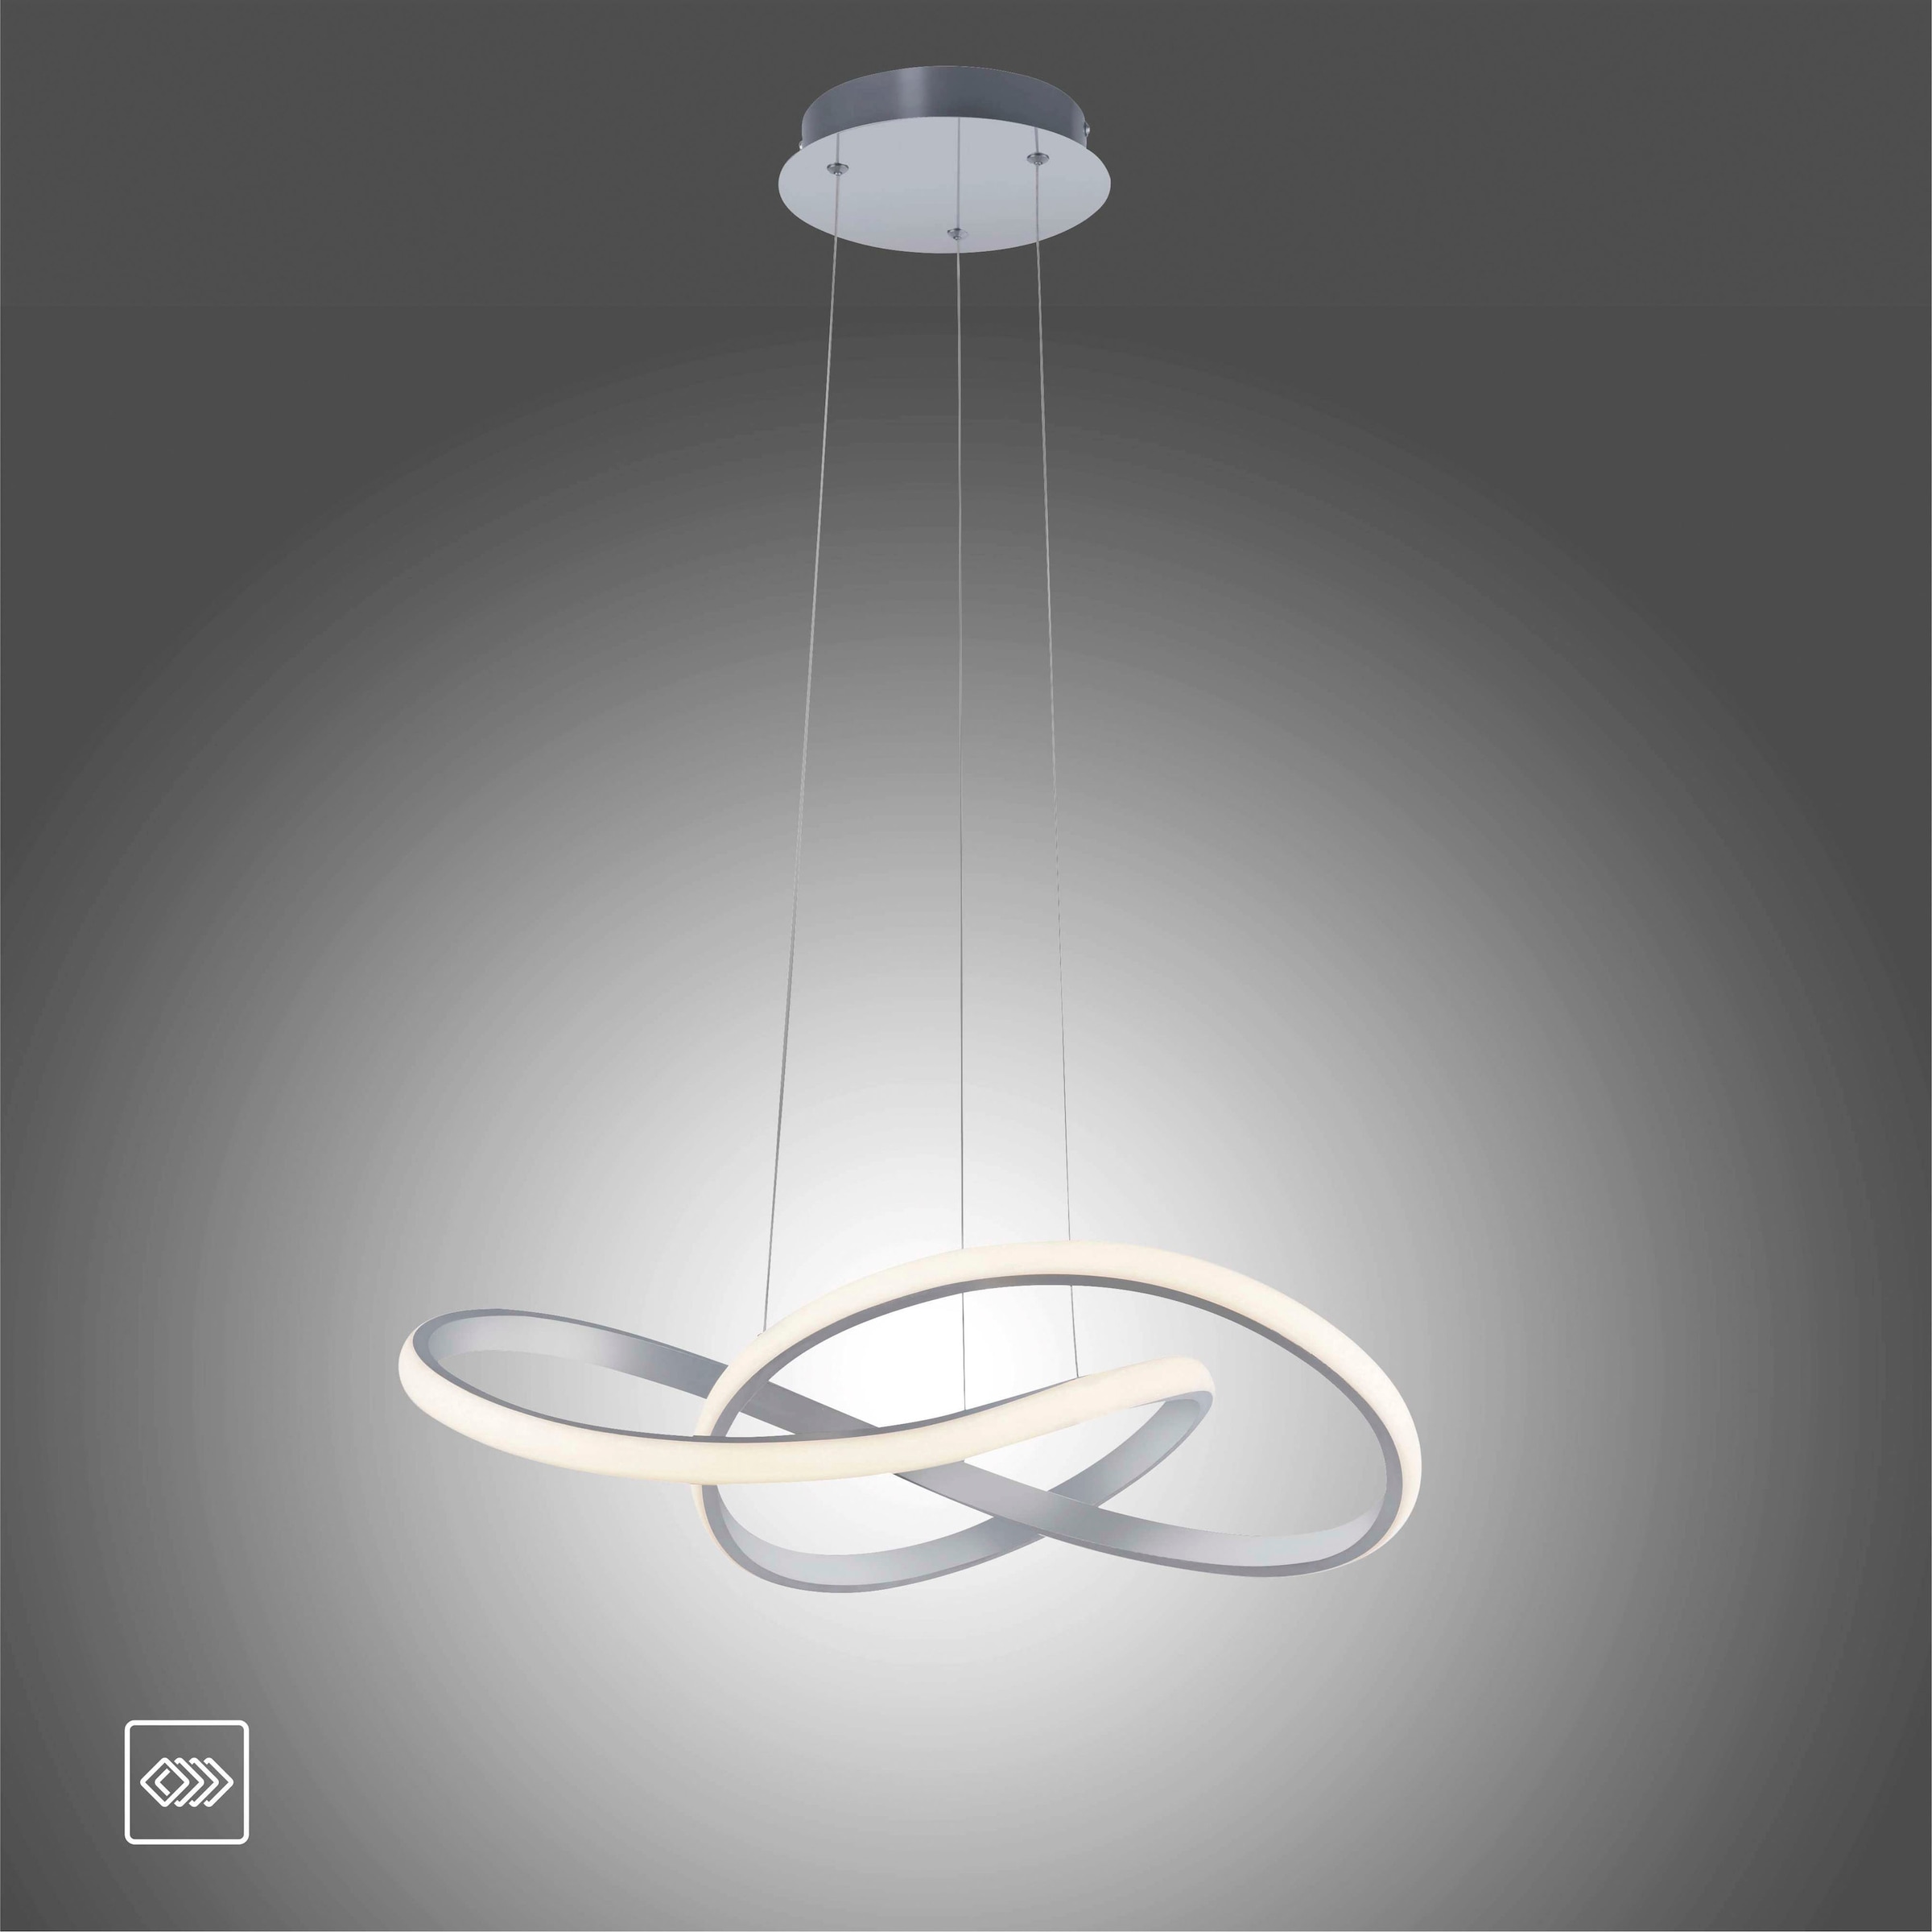 flammig-flammig, JUST LED, OTTO LIGHT Pendelleuchte 1 dimmbar, Switchmo »MARIA«, bei